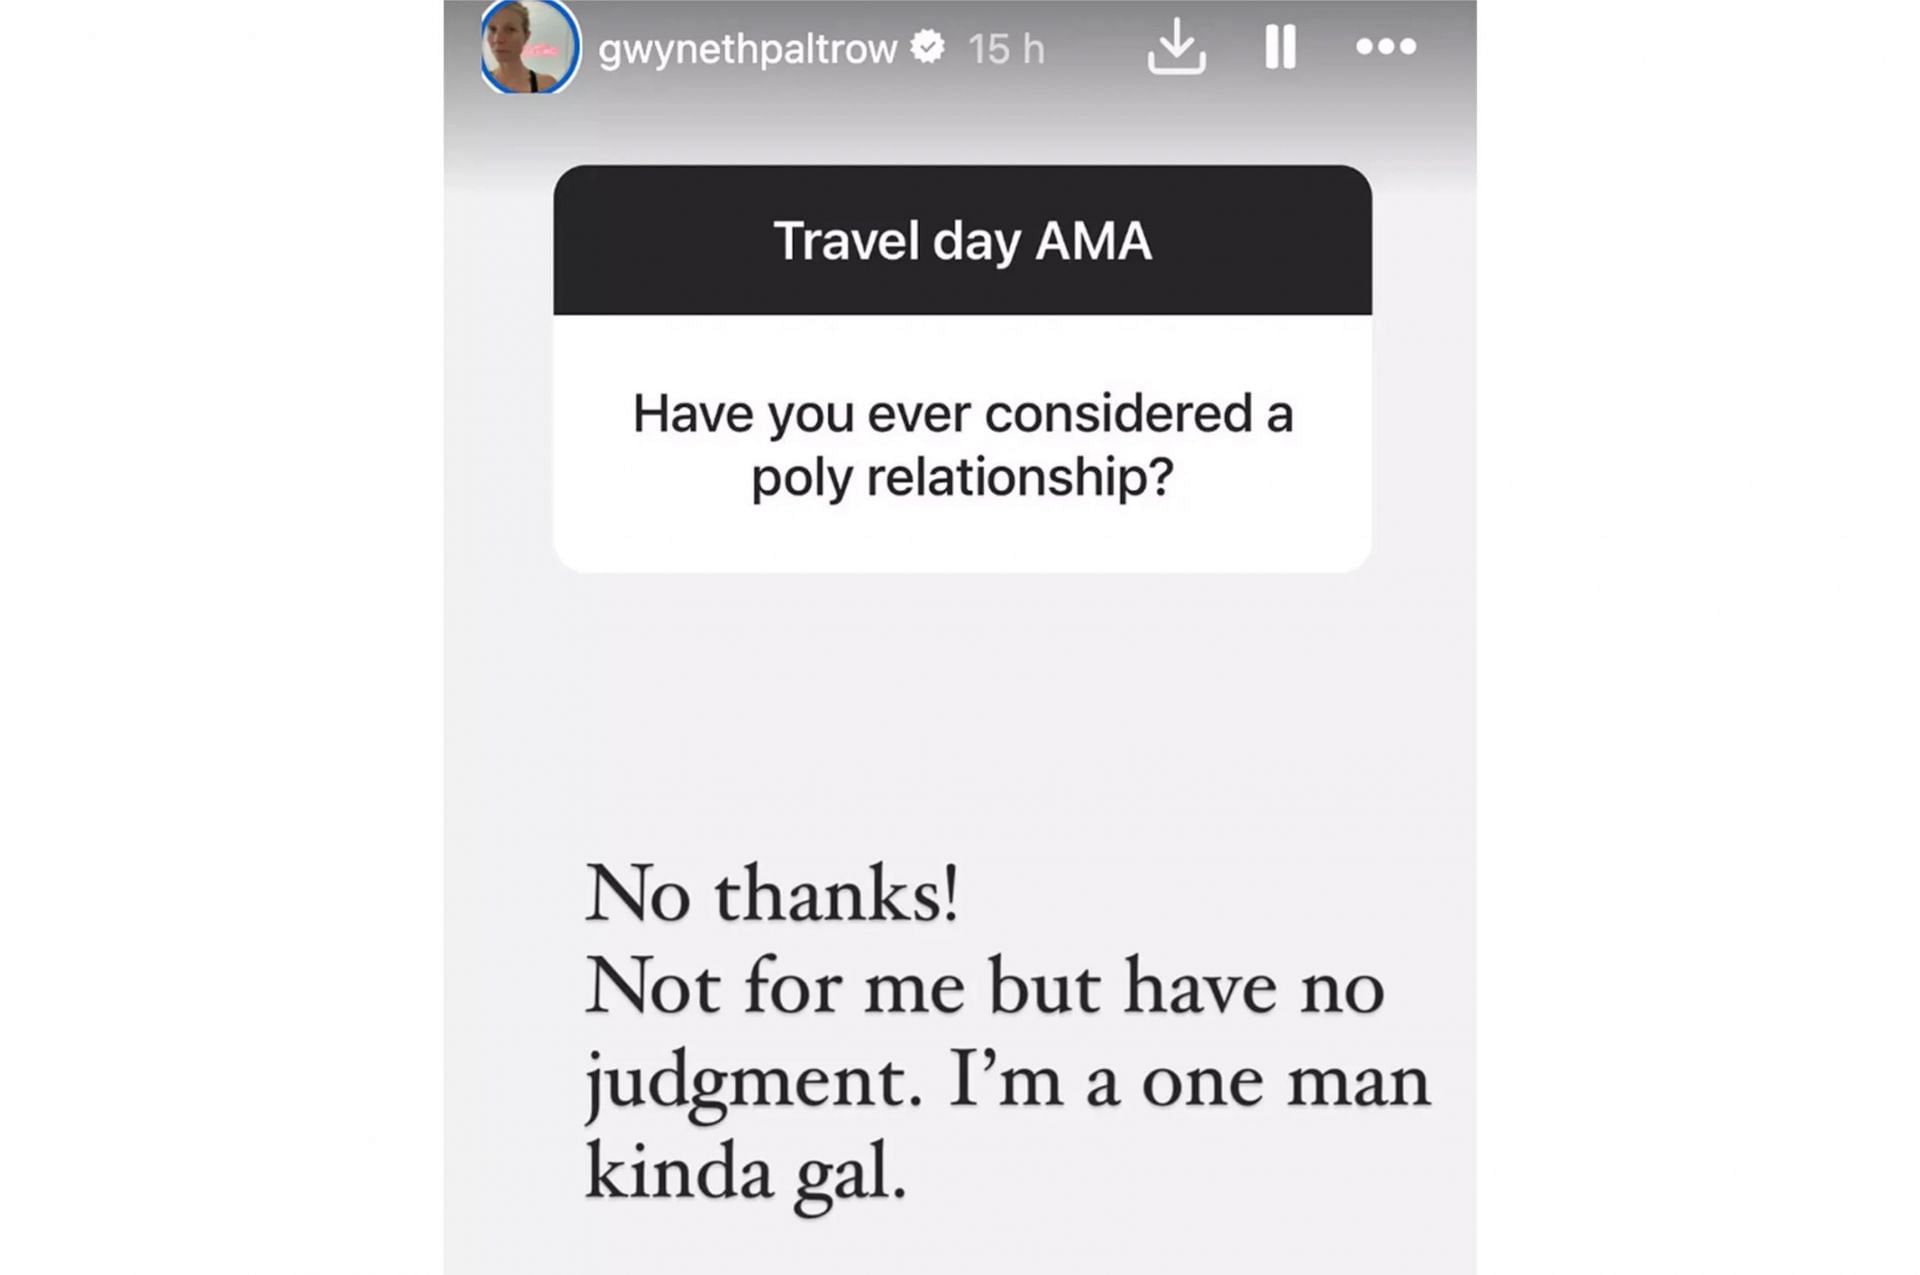 Gwyneth Paltrow&#039;s Instagram Ask Me Anything (Image sourced from Instagram @gwynethpaltrow)